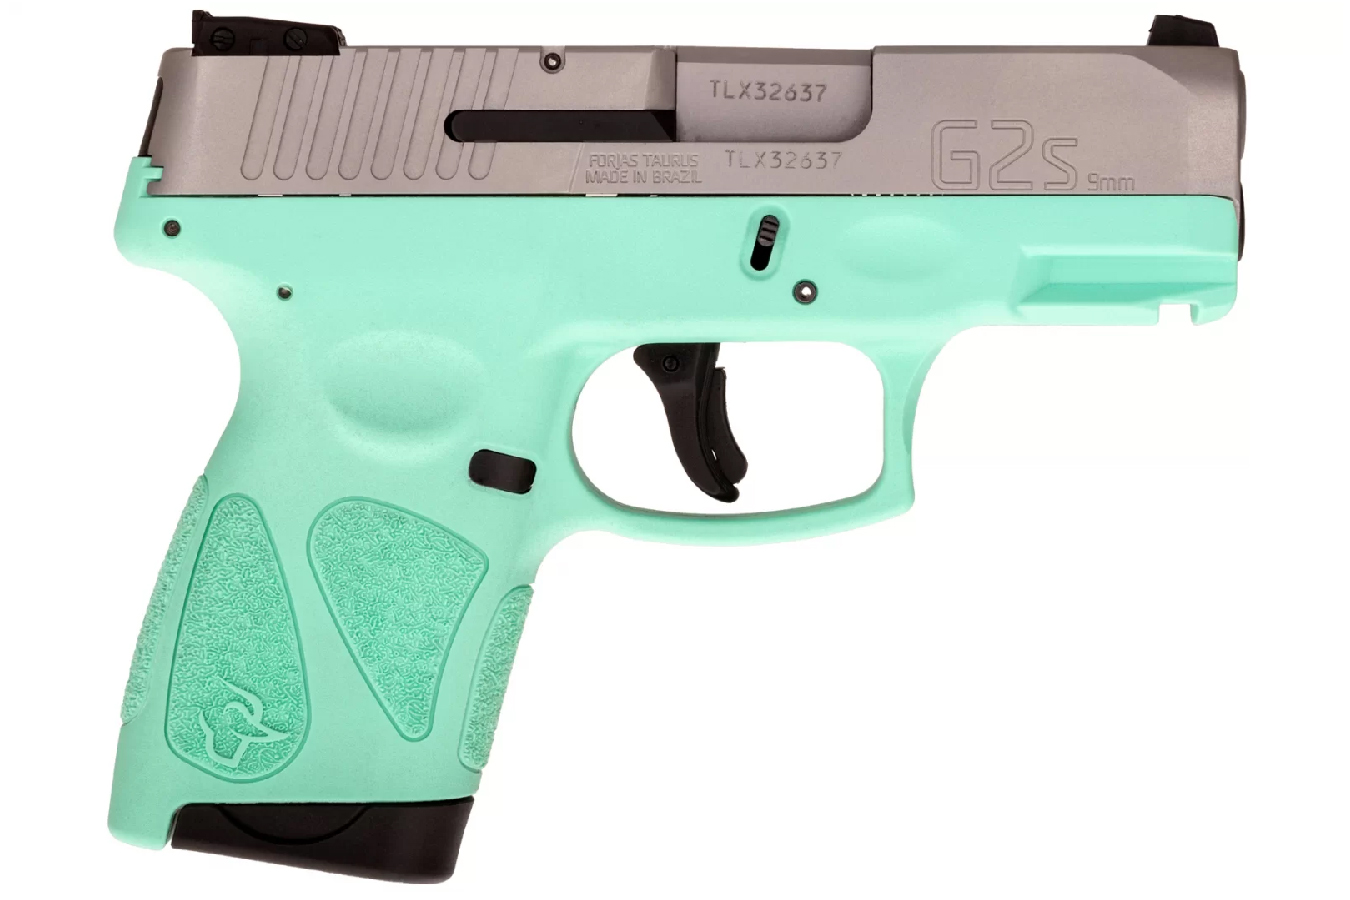 G2S 9MM SINGLE STACK PISTOL WITH CYAN FRAME AND STAINLESS SLIDE